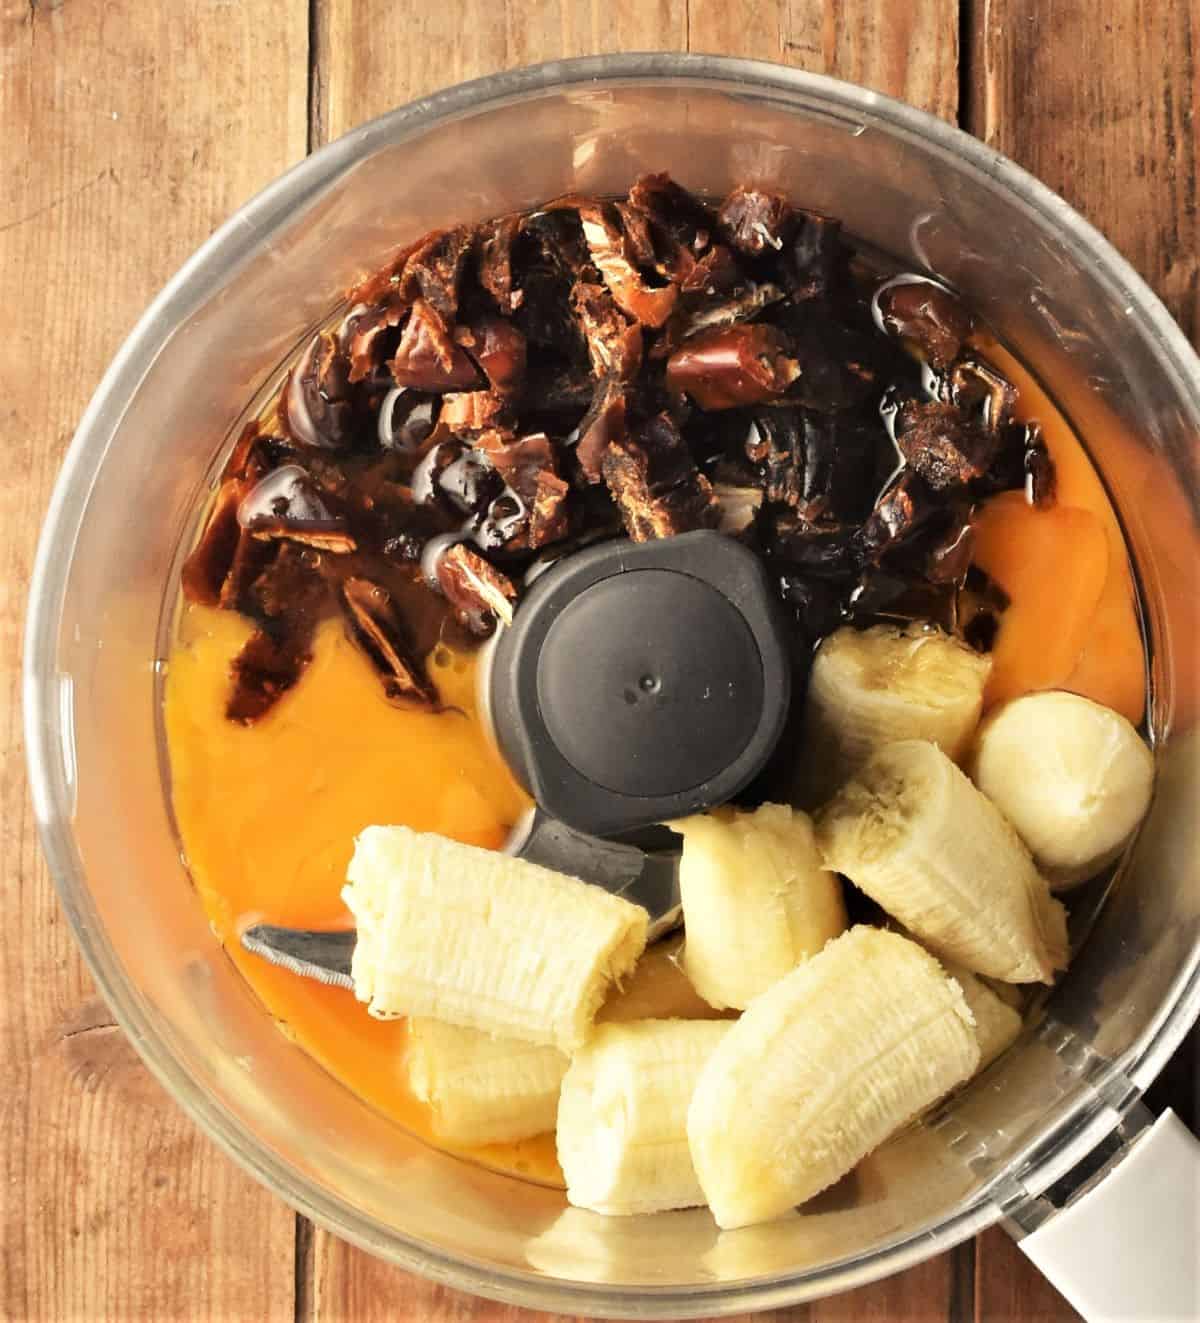 Chopped banana, dates and eggs in blender bowl.